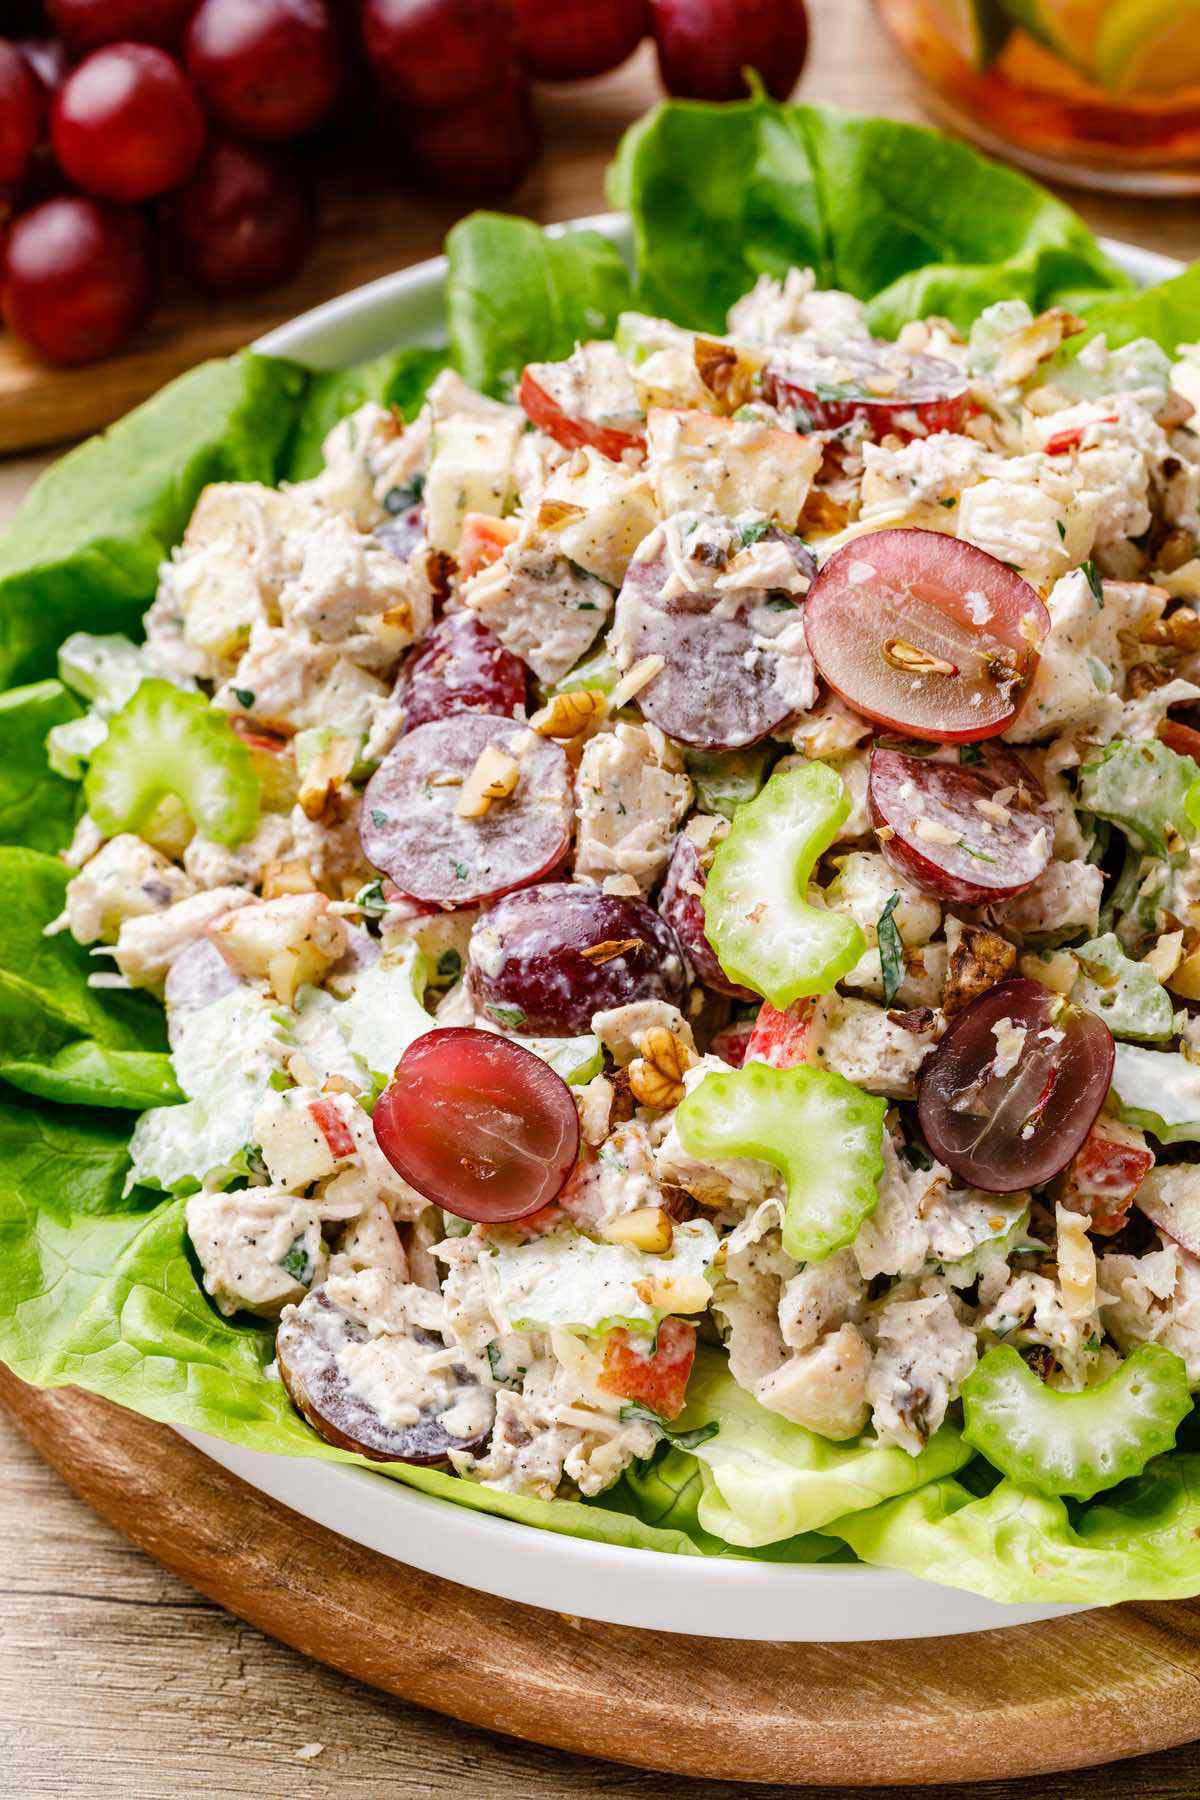 Chicken Salad with Grapes and Apples Elegant Classic Waldorf Paleo Chicken Salad with Apples Grapes